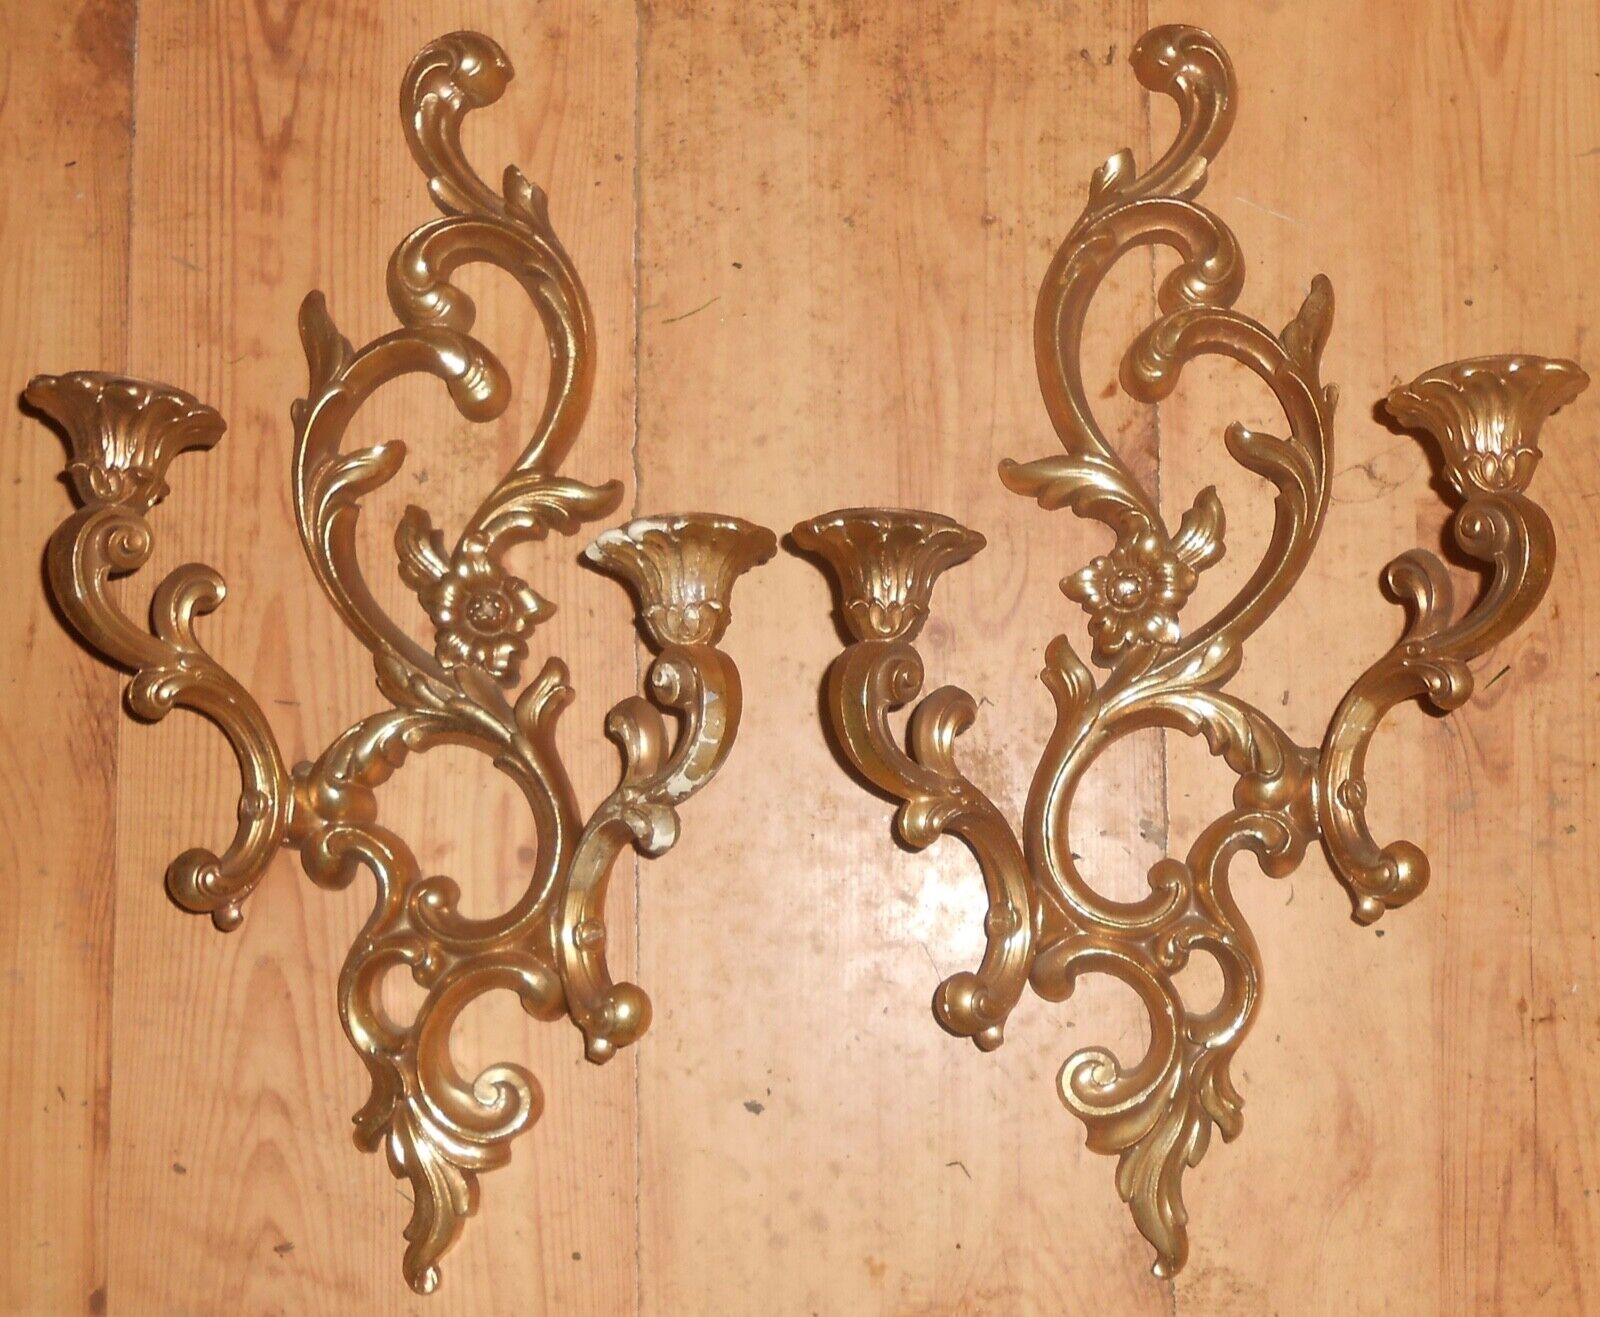 Vintage Syroco Gold Double Arm Candle Wall Sconces Mid Century Hollywood Regency